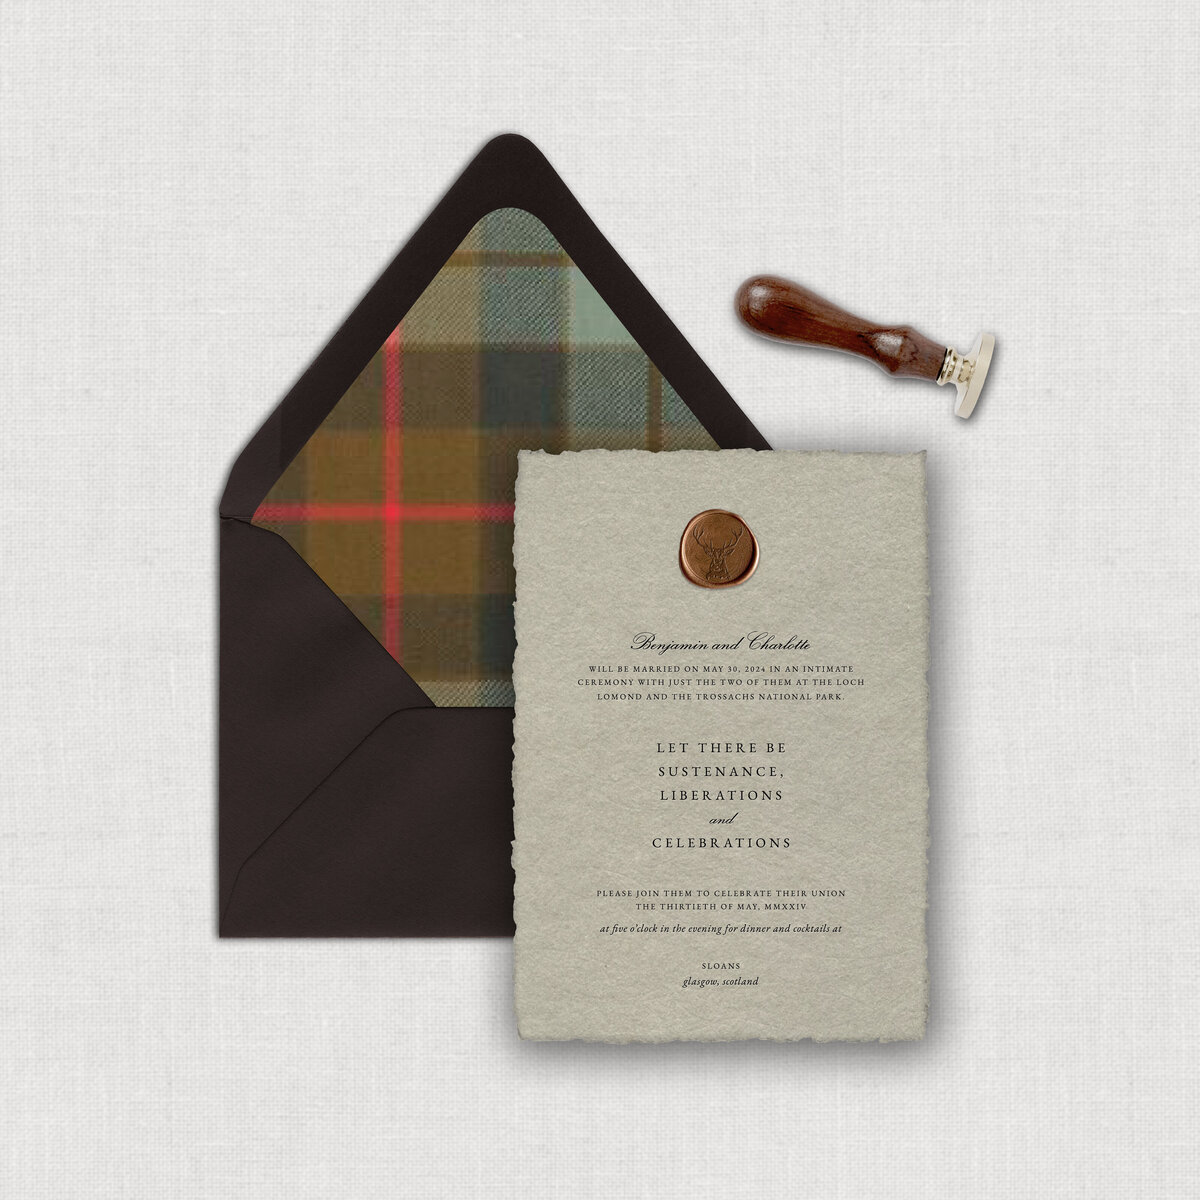 Letterpress Scotland Destination Wedding invitation suite with copper wax seal on textured thick handmade paper with chocolate brown mailing envelope with plaid tartan envelope liner.